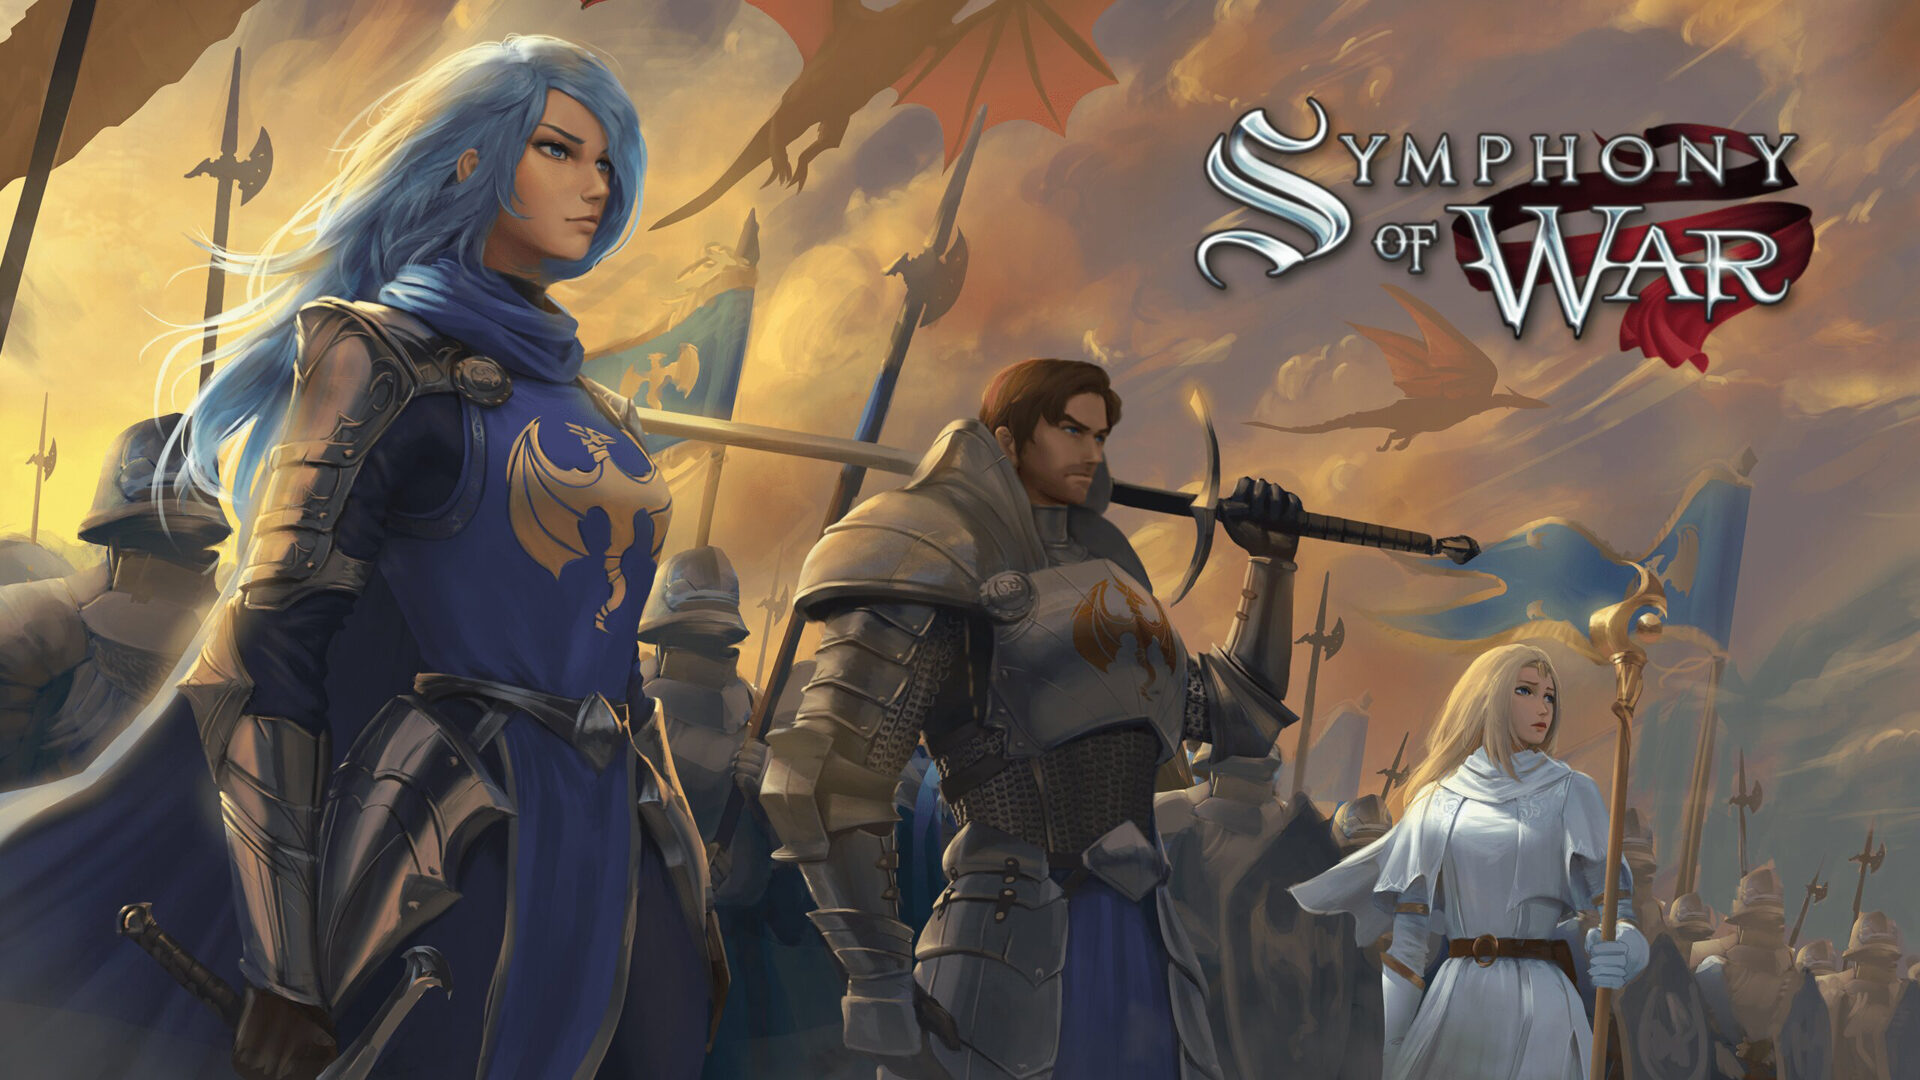 Image is a poster of Symphony of war game. It shows two main characters.